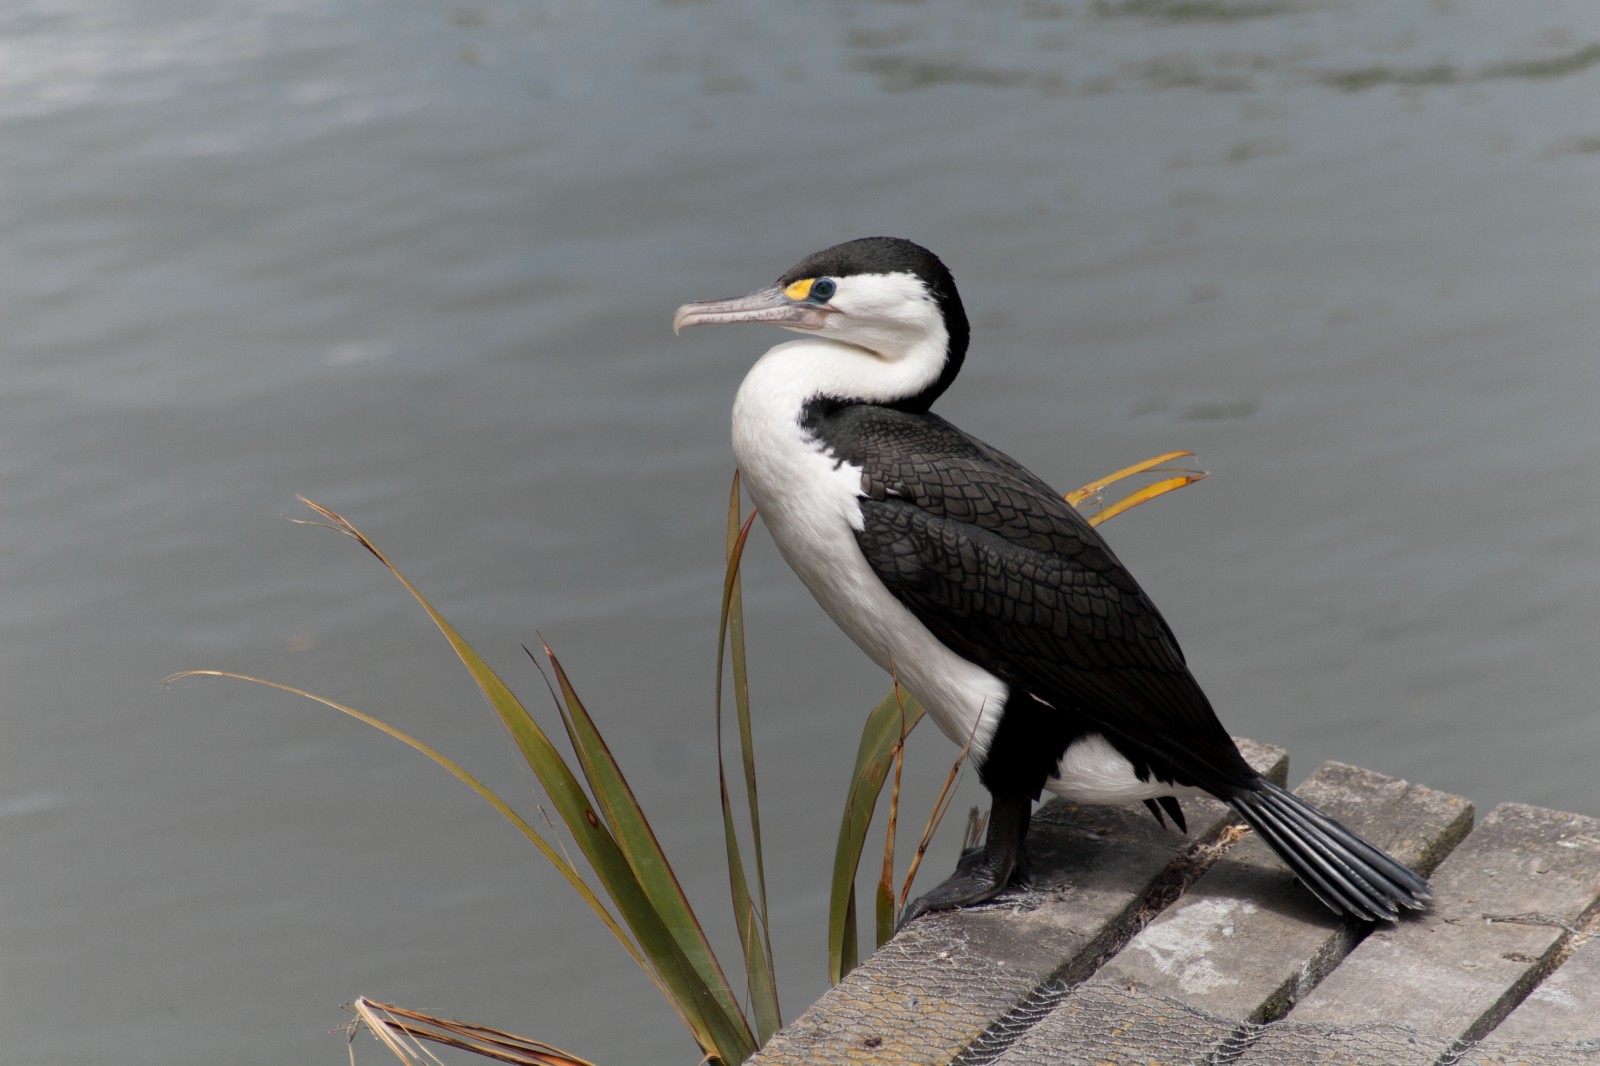 bird sitting / waiting by the side of the river on a small wooden platform